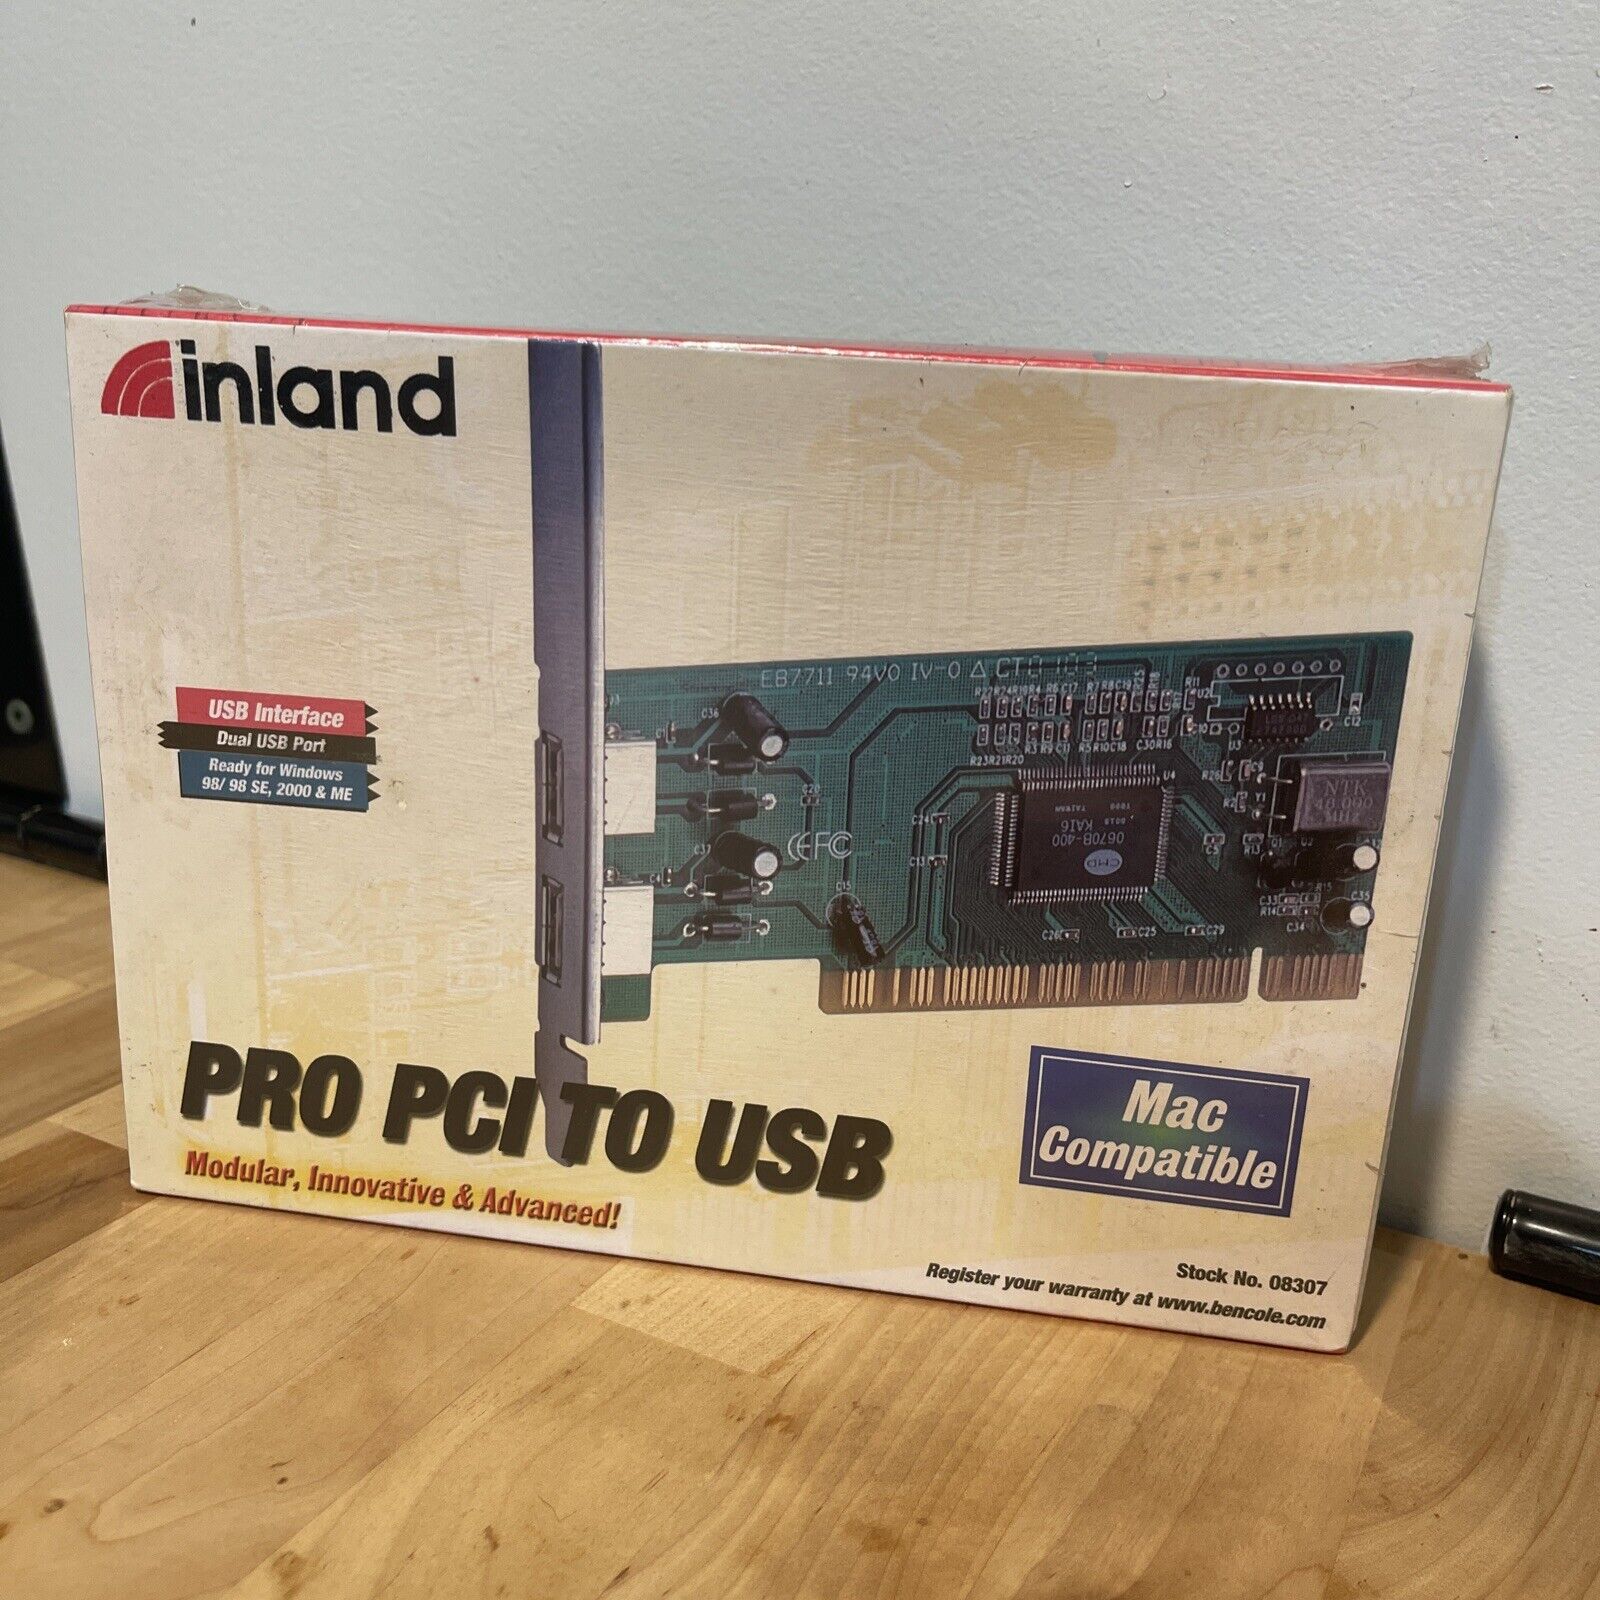 Inland Pro PCI to USB 08307 USB Interface with Dual USB Ports